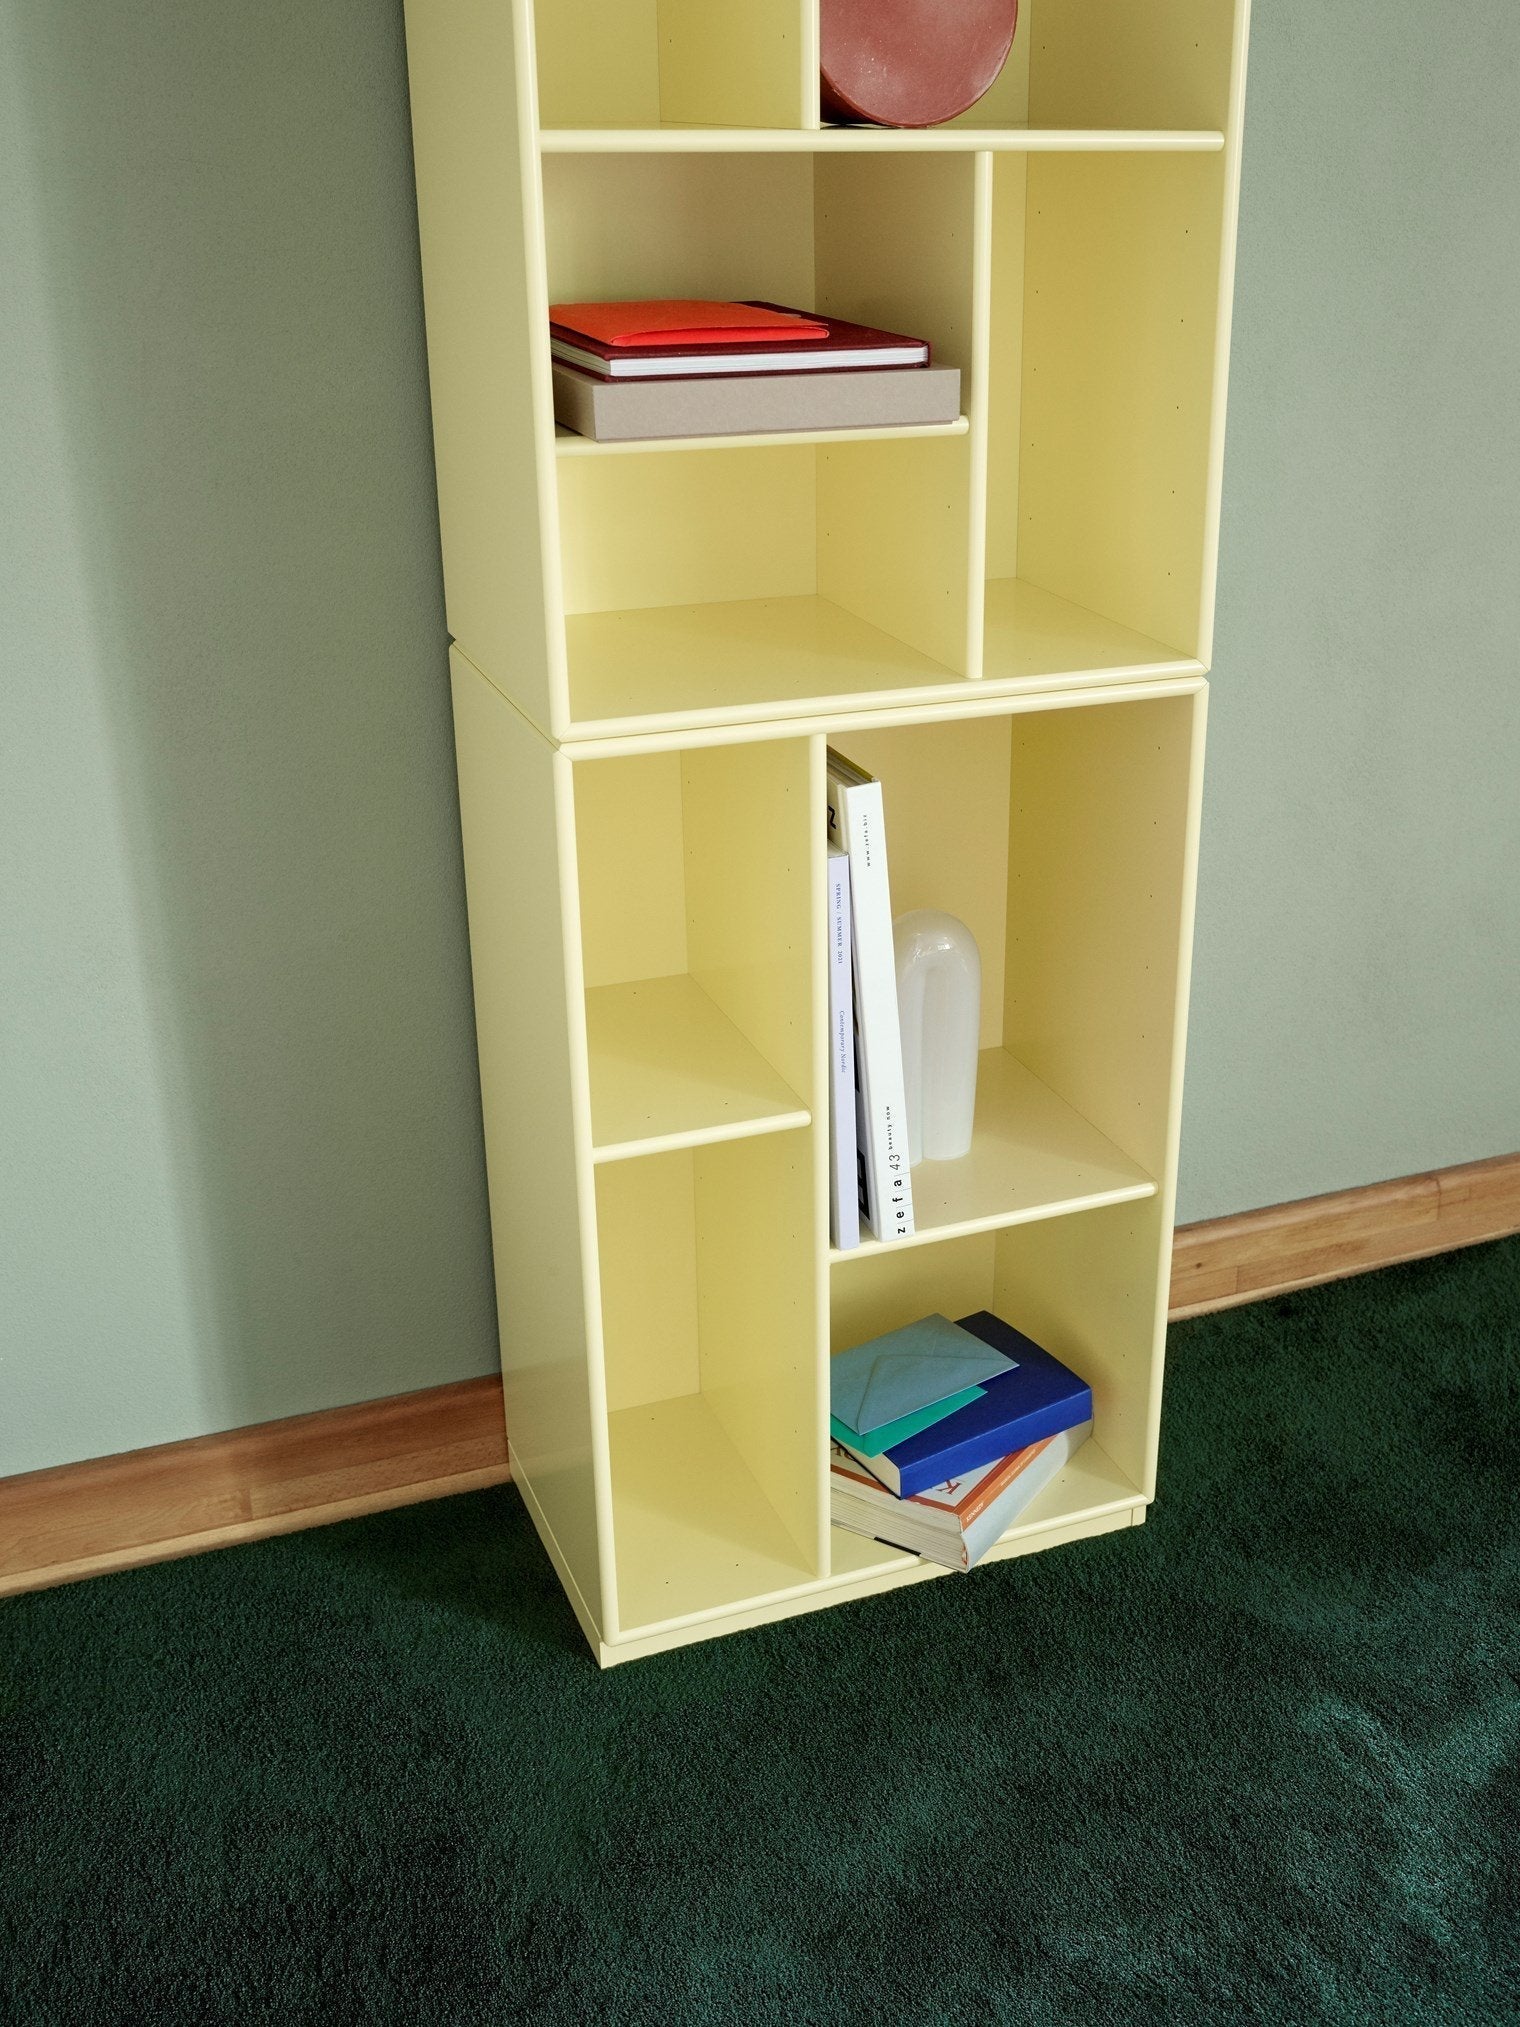 Montana Loom High Bookcase With 7 Cm Plinth, Rosehip Red